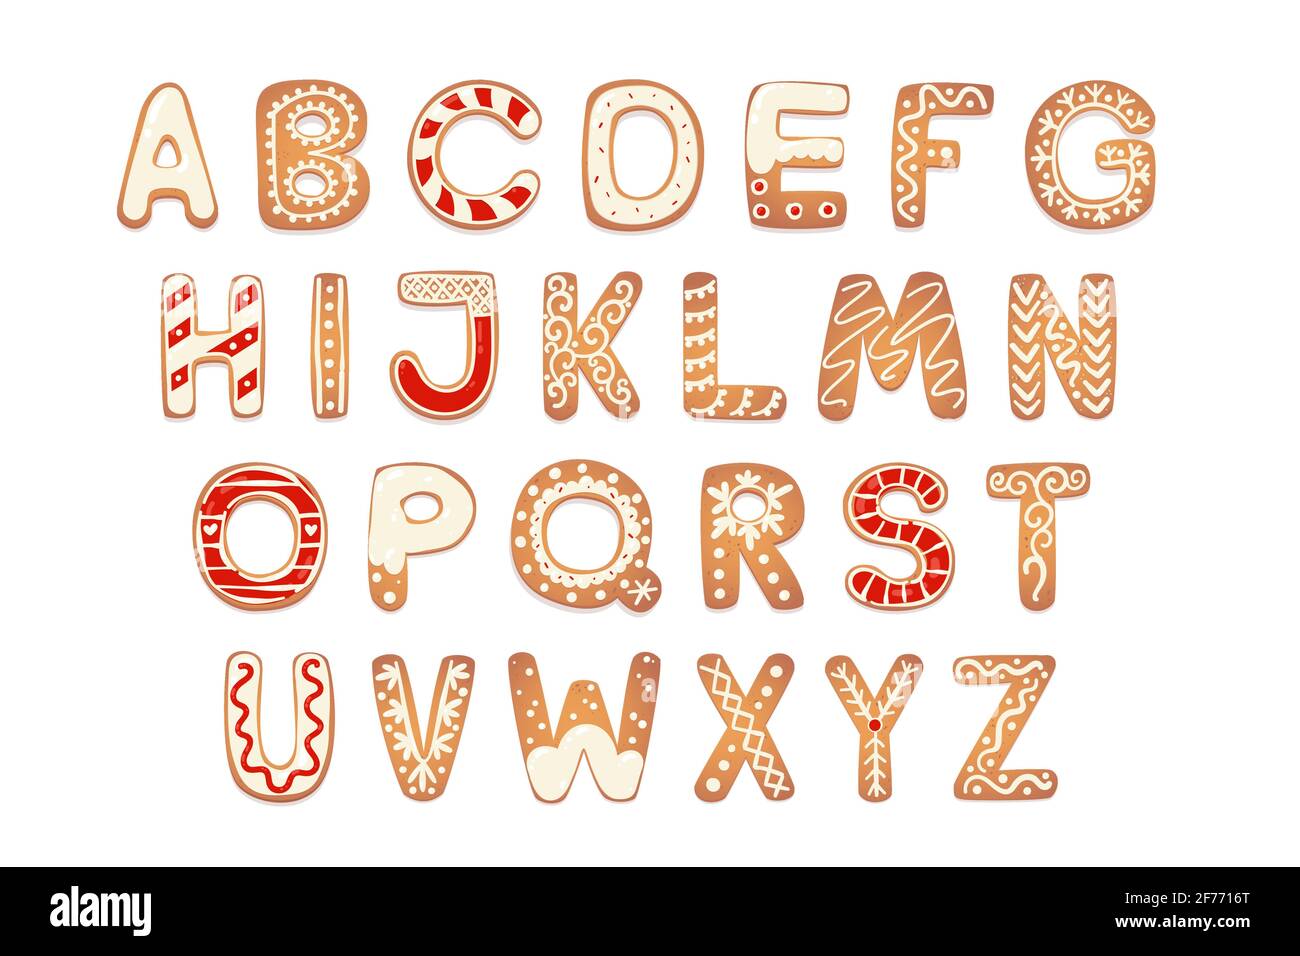 Christmas gingerbread cookies alphabet. Biscuit letters for xmas messages and design. Vector figures with sugar decorations. Stock Vector